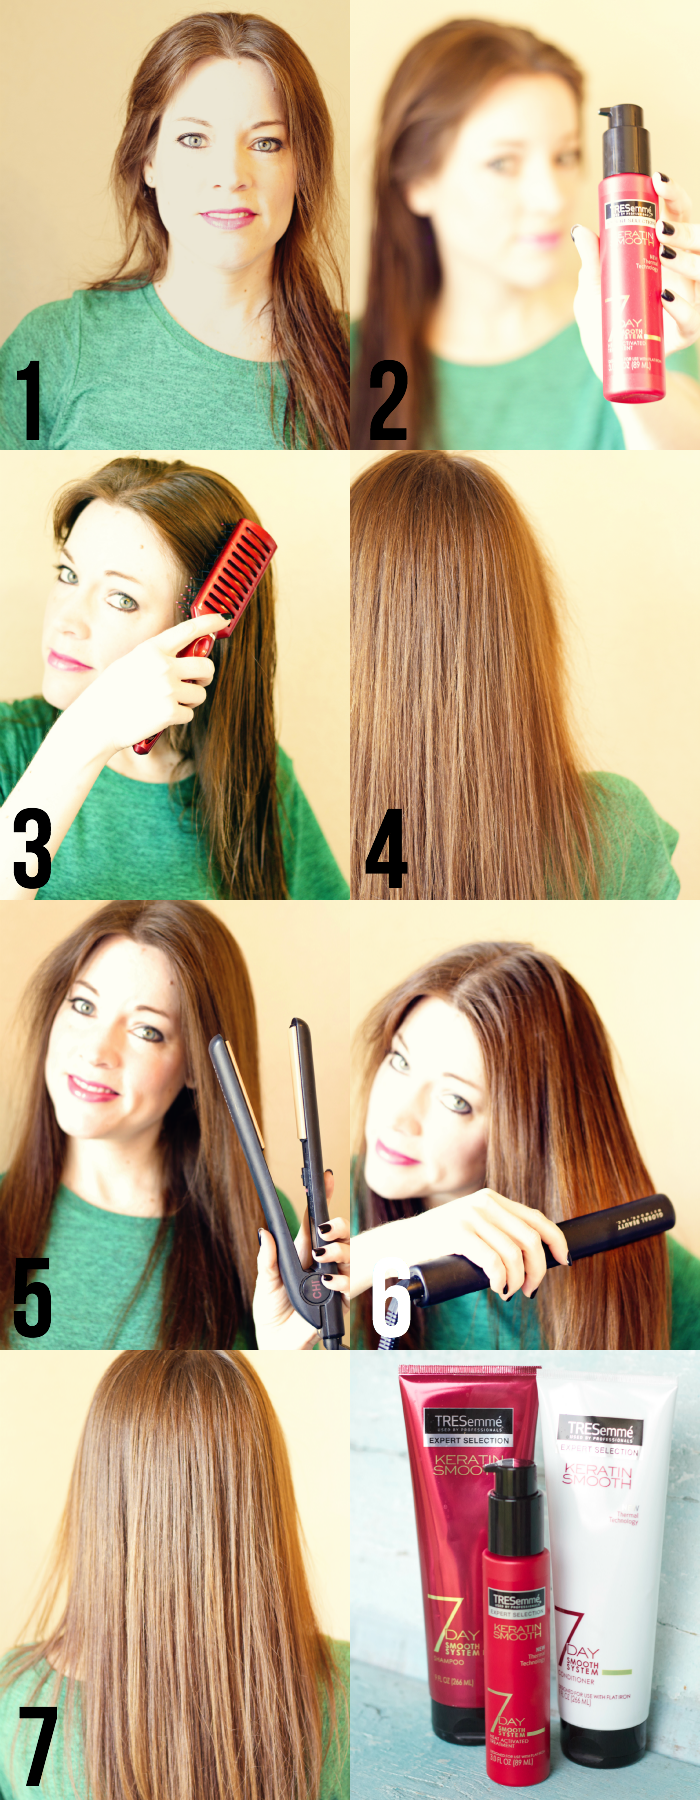 Hair Tutorial: Showing you how to use the Smooth Made Simple Hair Products